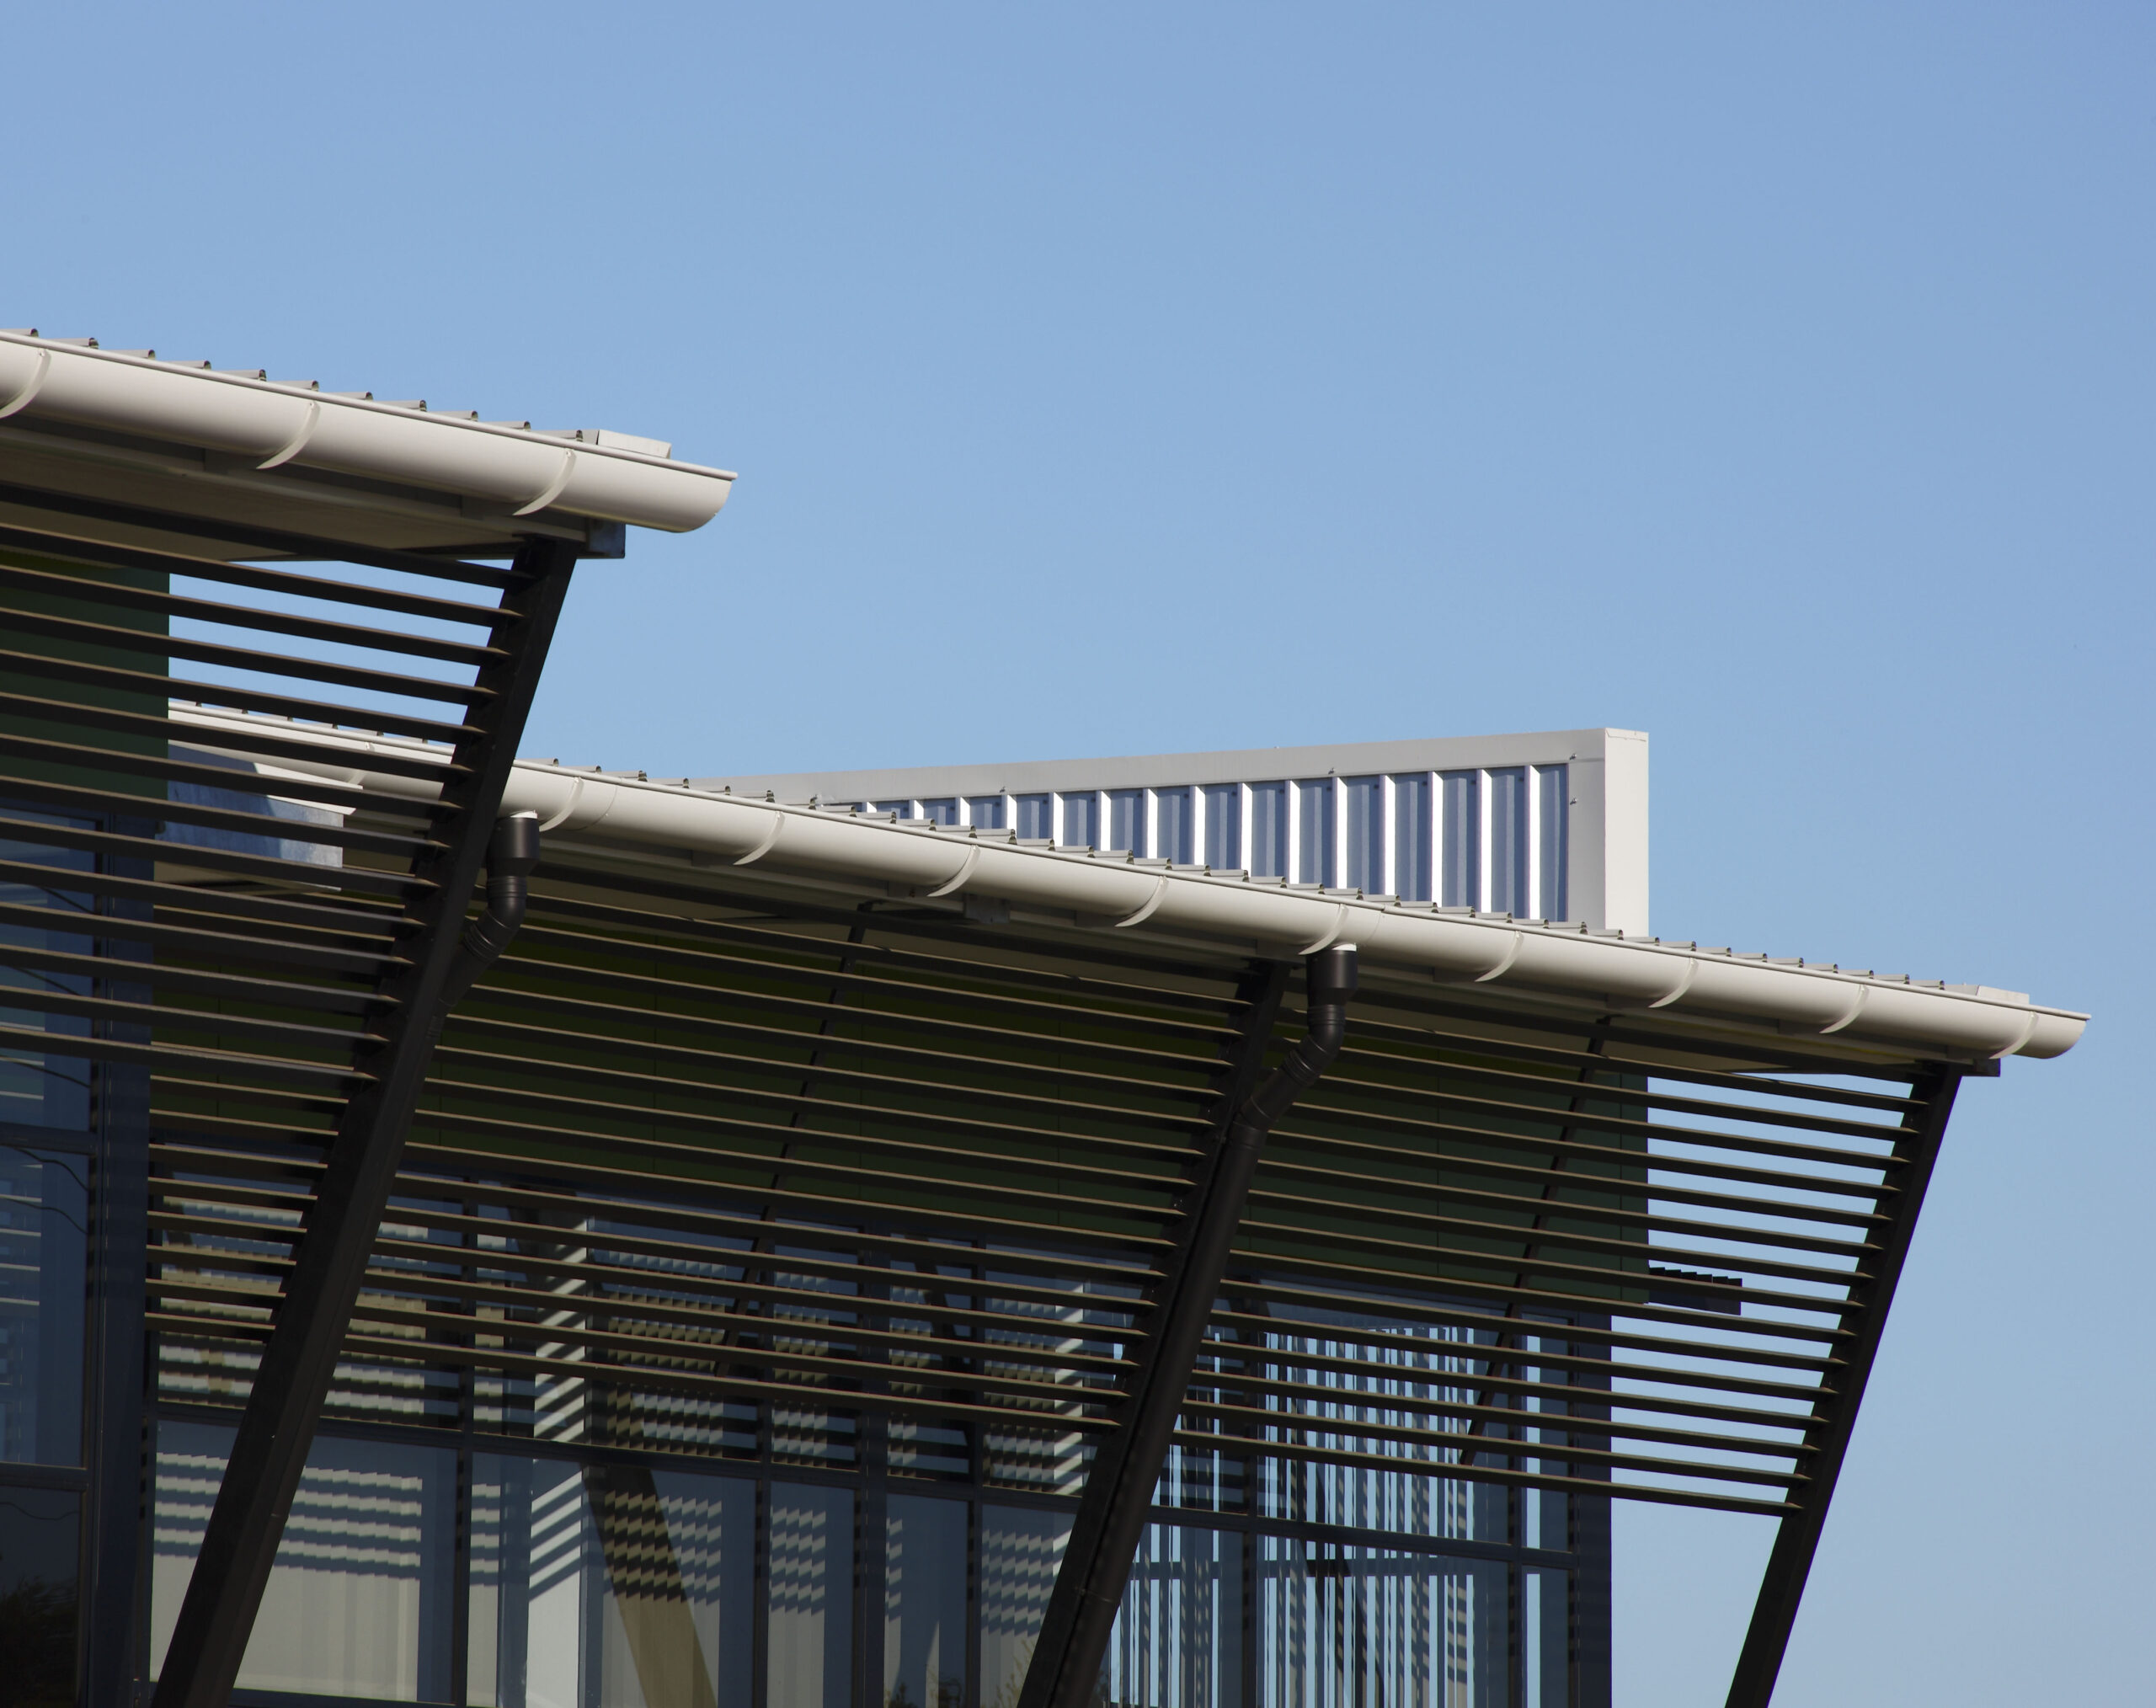 Close-up of the junction between a warehouse roof and angled columns, featuring aluminum horizontal shading elements extending up to the roof's base